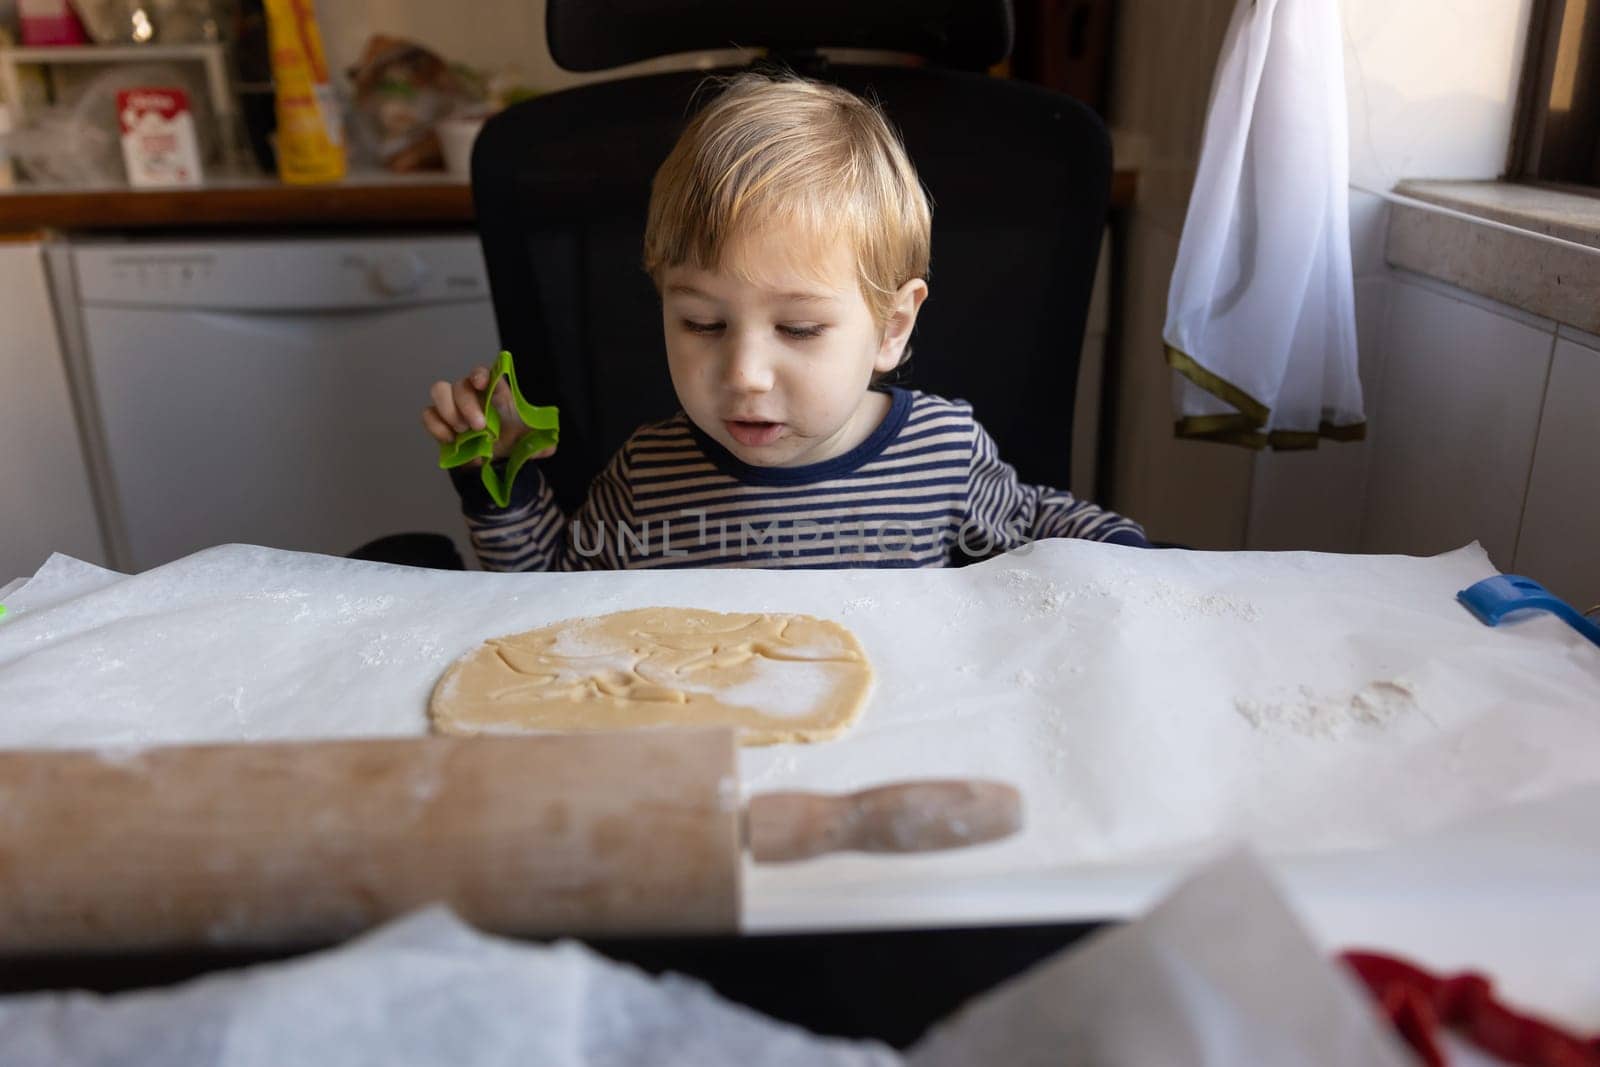 Family cooking - a little boy cuts dinosaurs out of raw dough with a mold. Mid shot